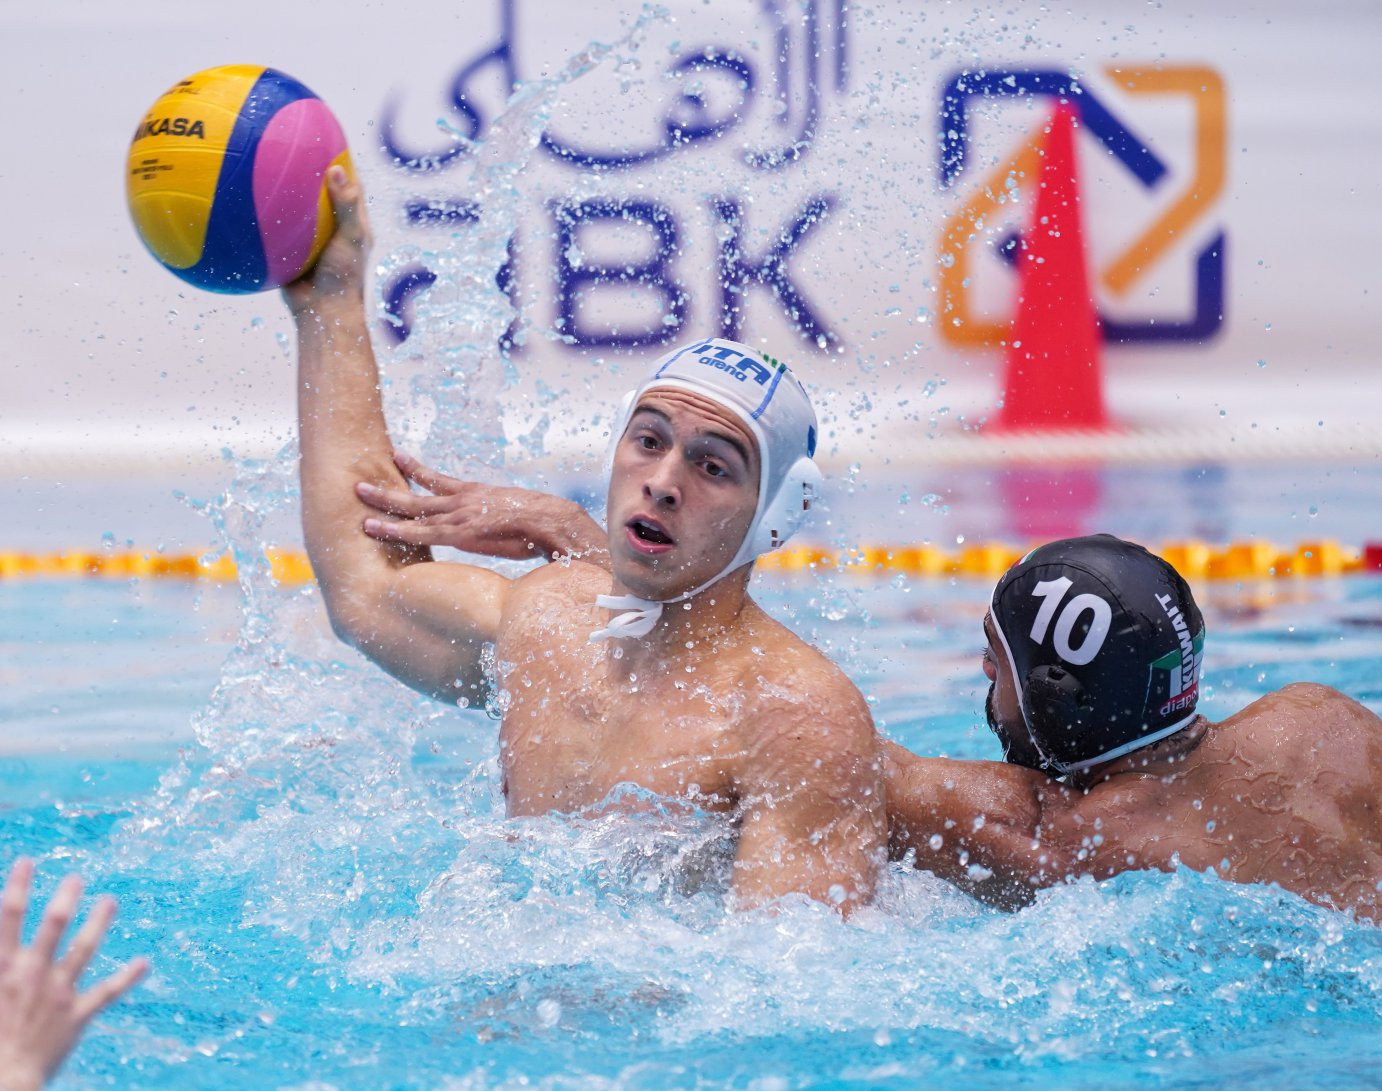 Italy claimed a comfortable win over hosts Kuwait to secure direct entry to the quarter-finals at the FINA World Men's Junior Water Polo Championships in Kuwait City ©Eszter Novak/FINA